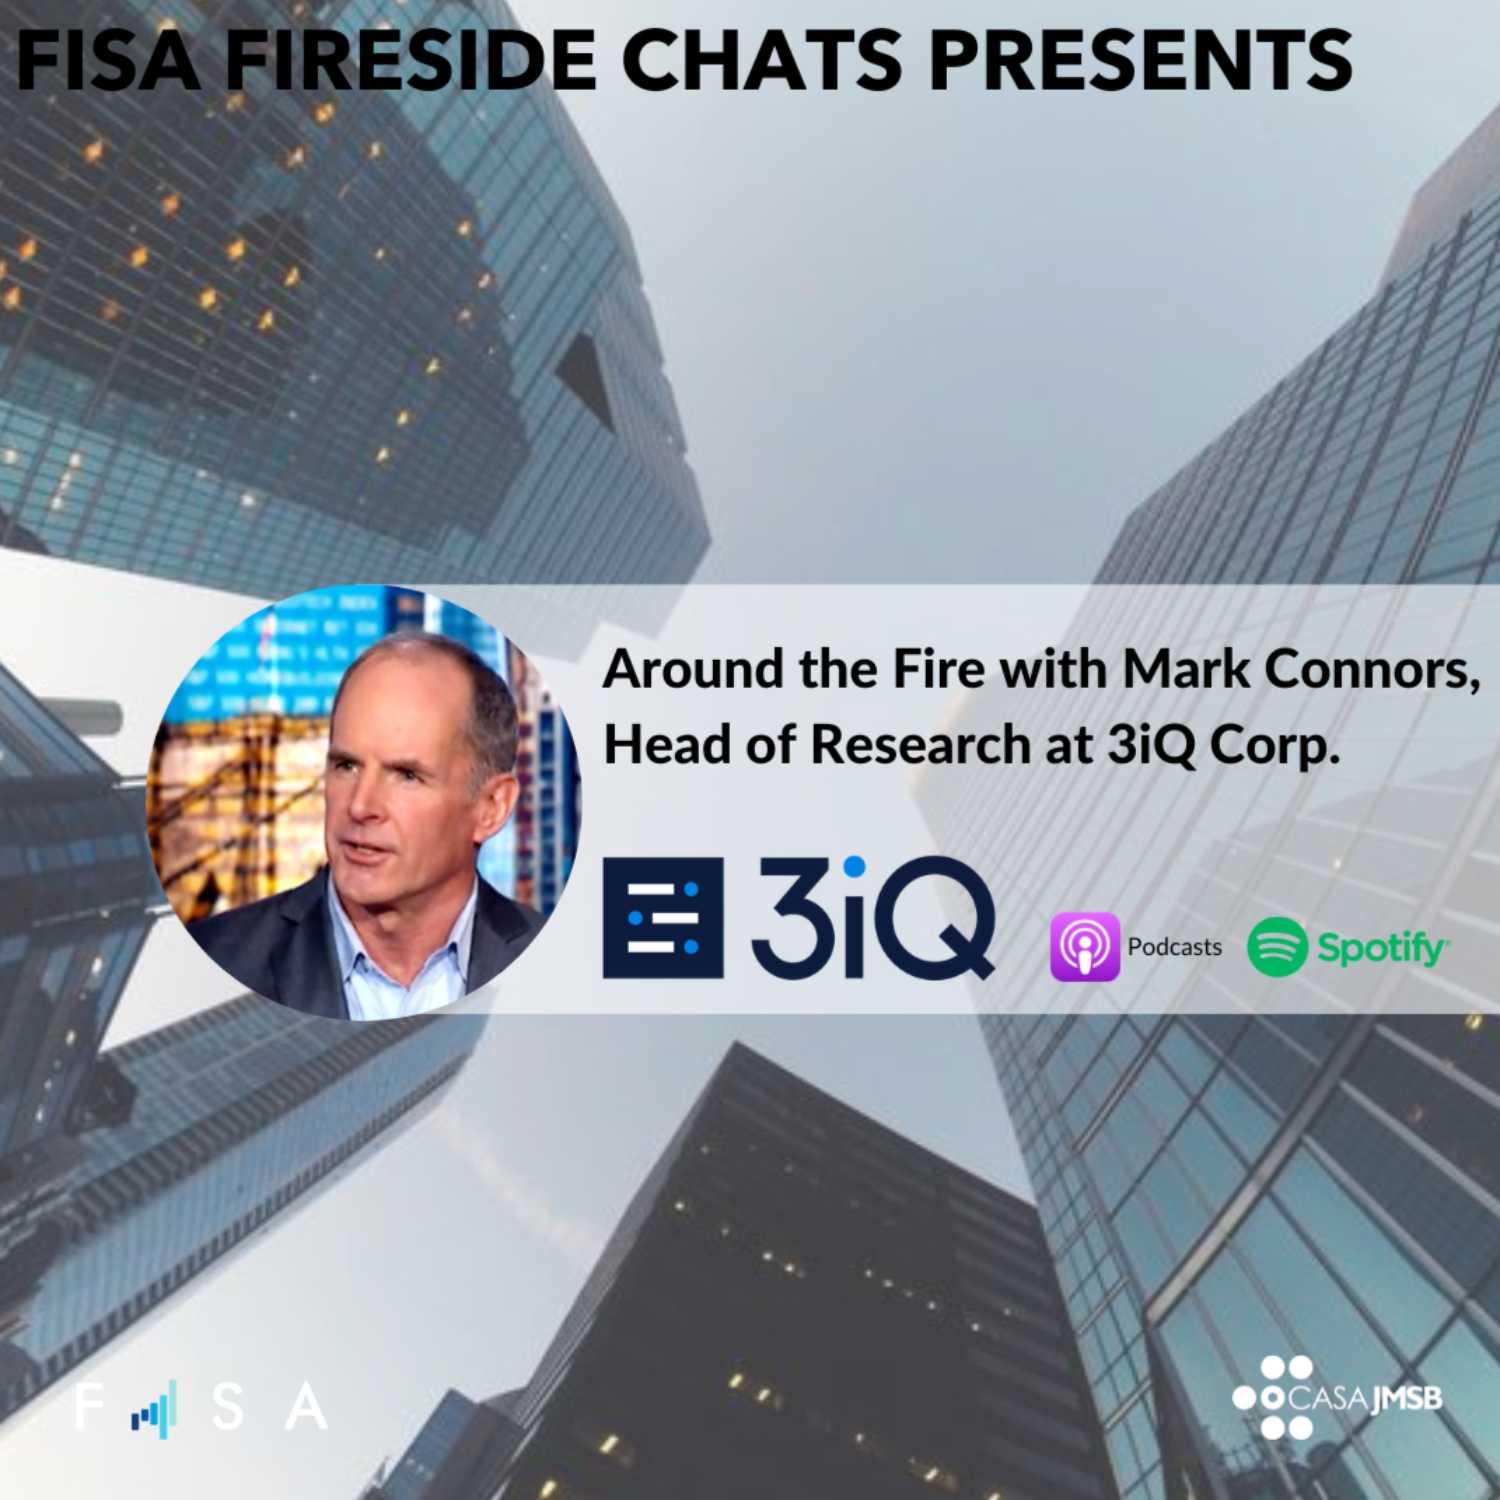 Around the Fire with Mark Connors, Director of Research at 3iQ Corp.